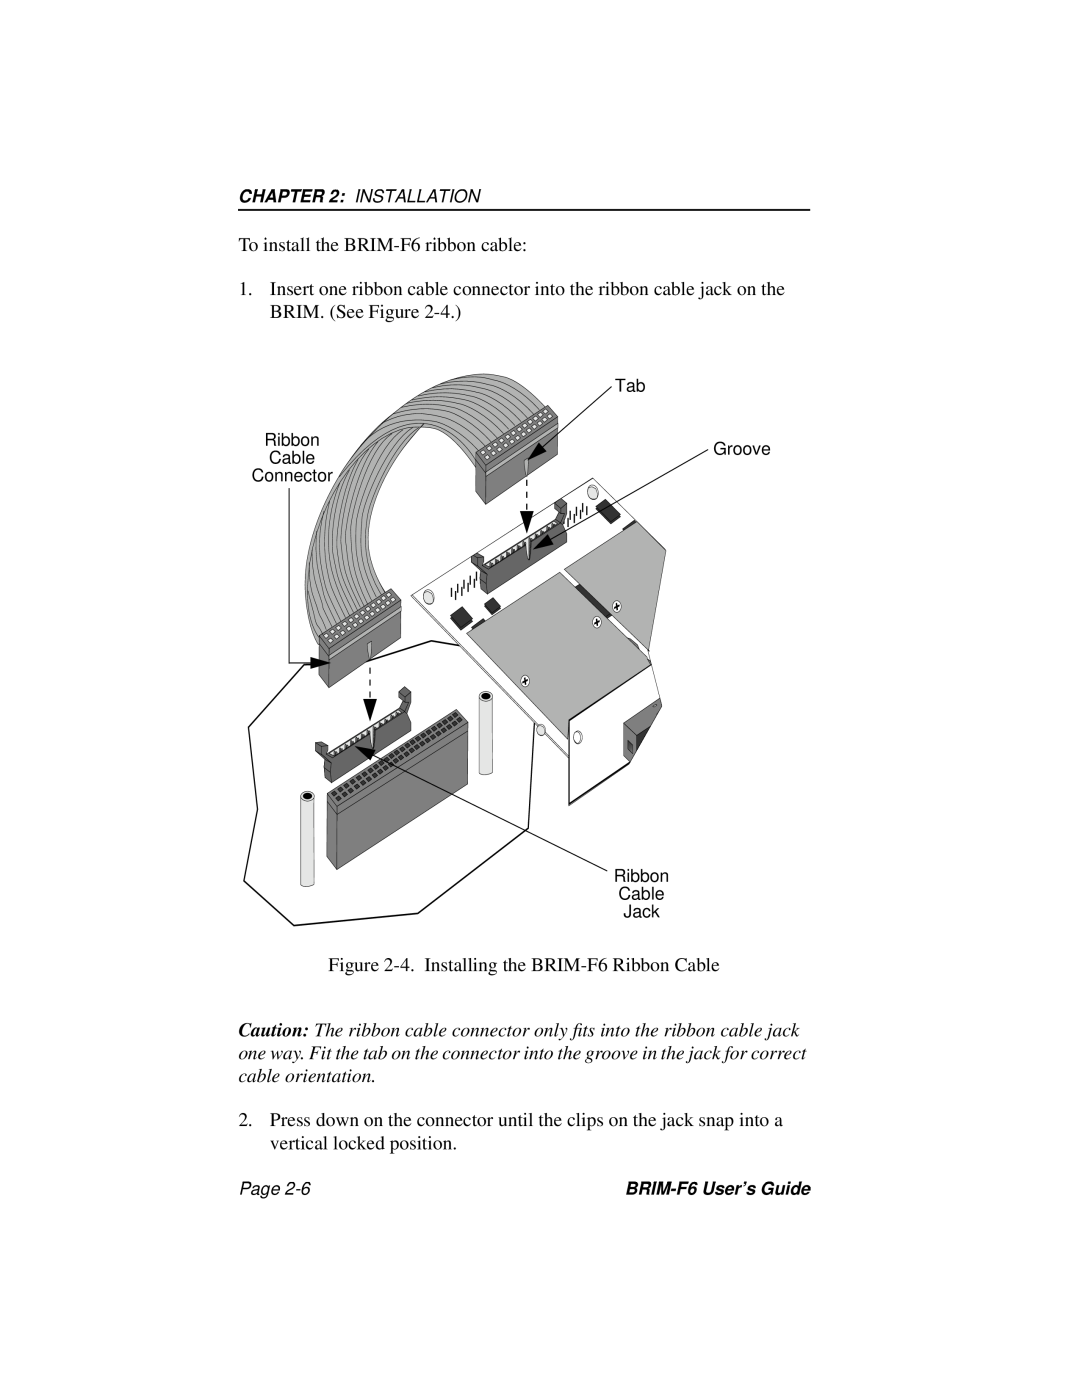 Cabletron Systems manual To install the BRIM-F6 ribbon cable 